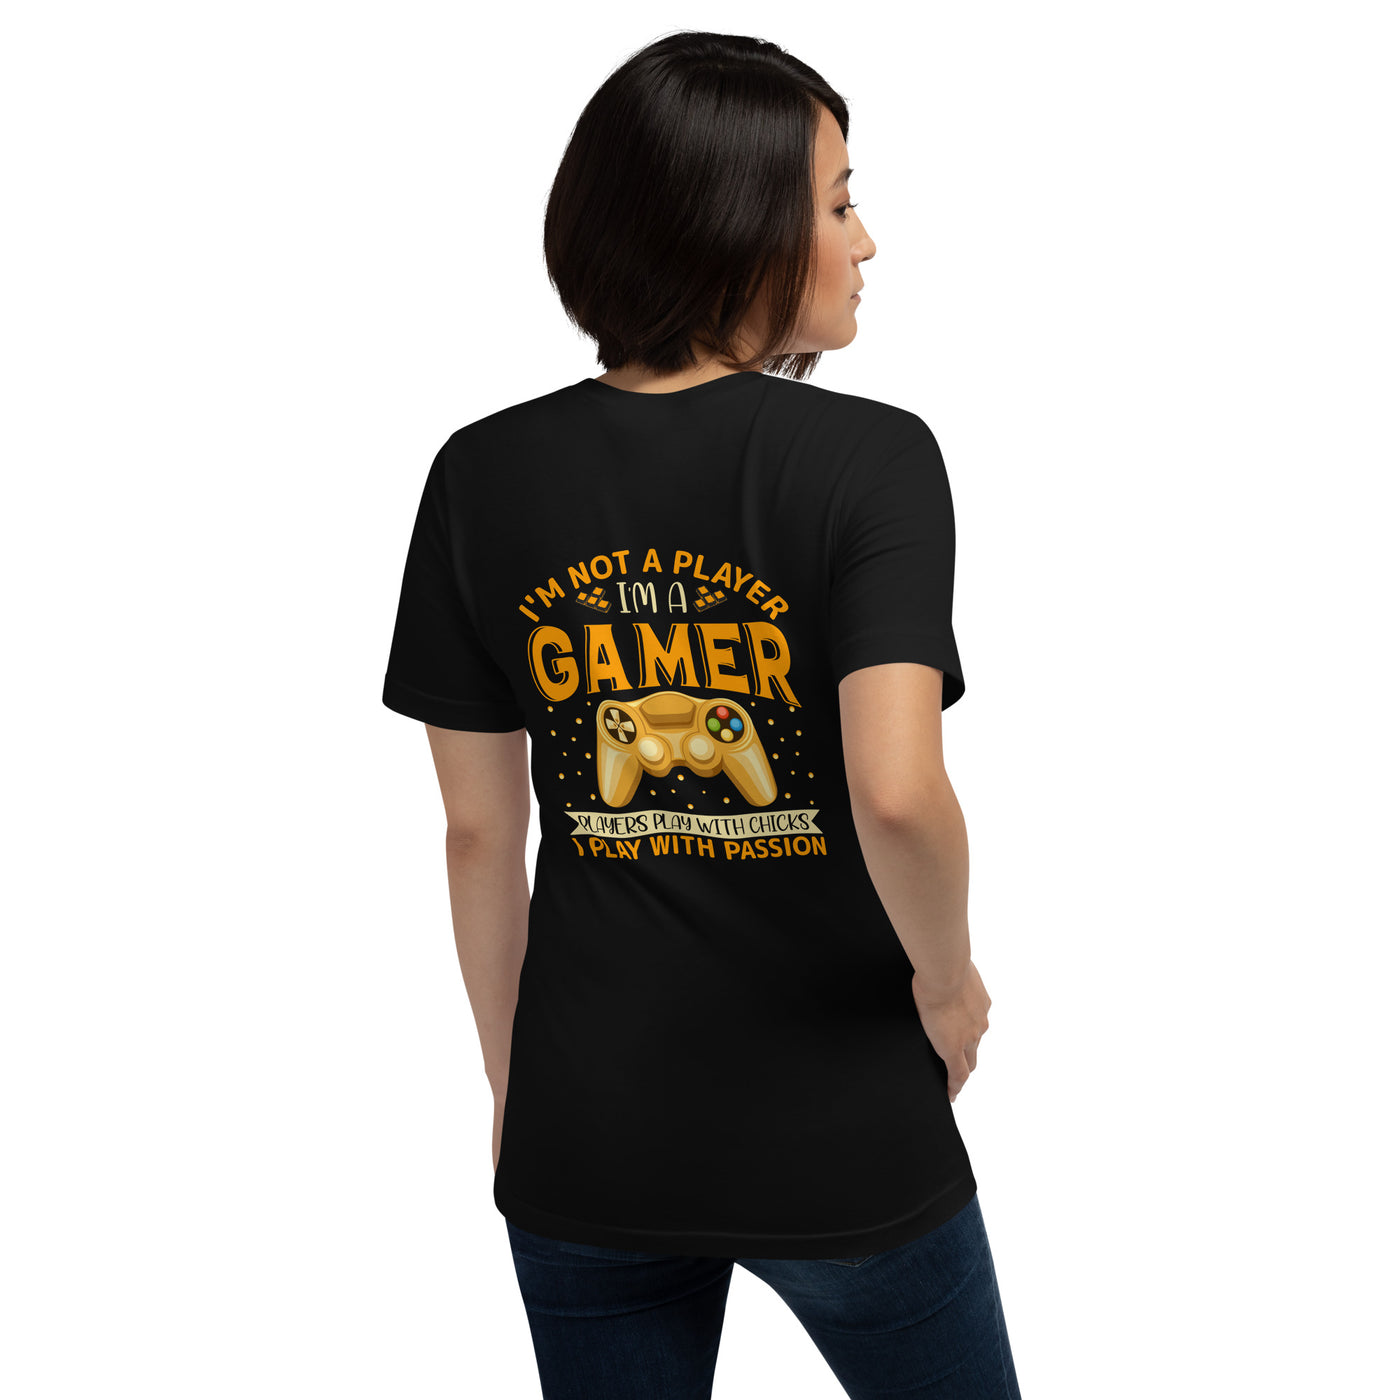 I am not a Player, I am a Gamer; Player plays with Chicks, I play with Passion - Unisex t-shirt  ( Back Print )